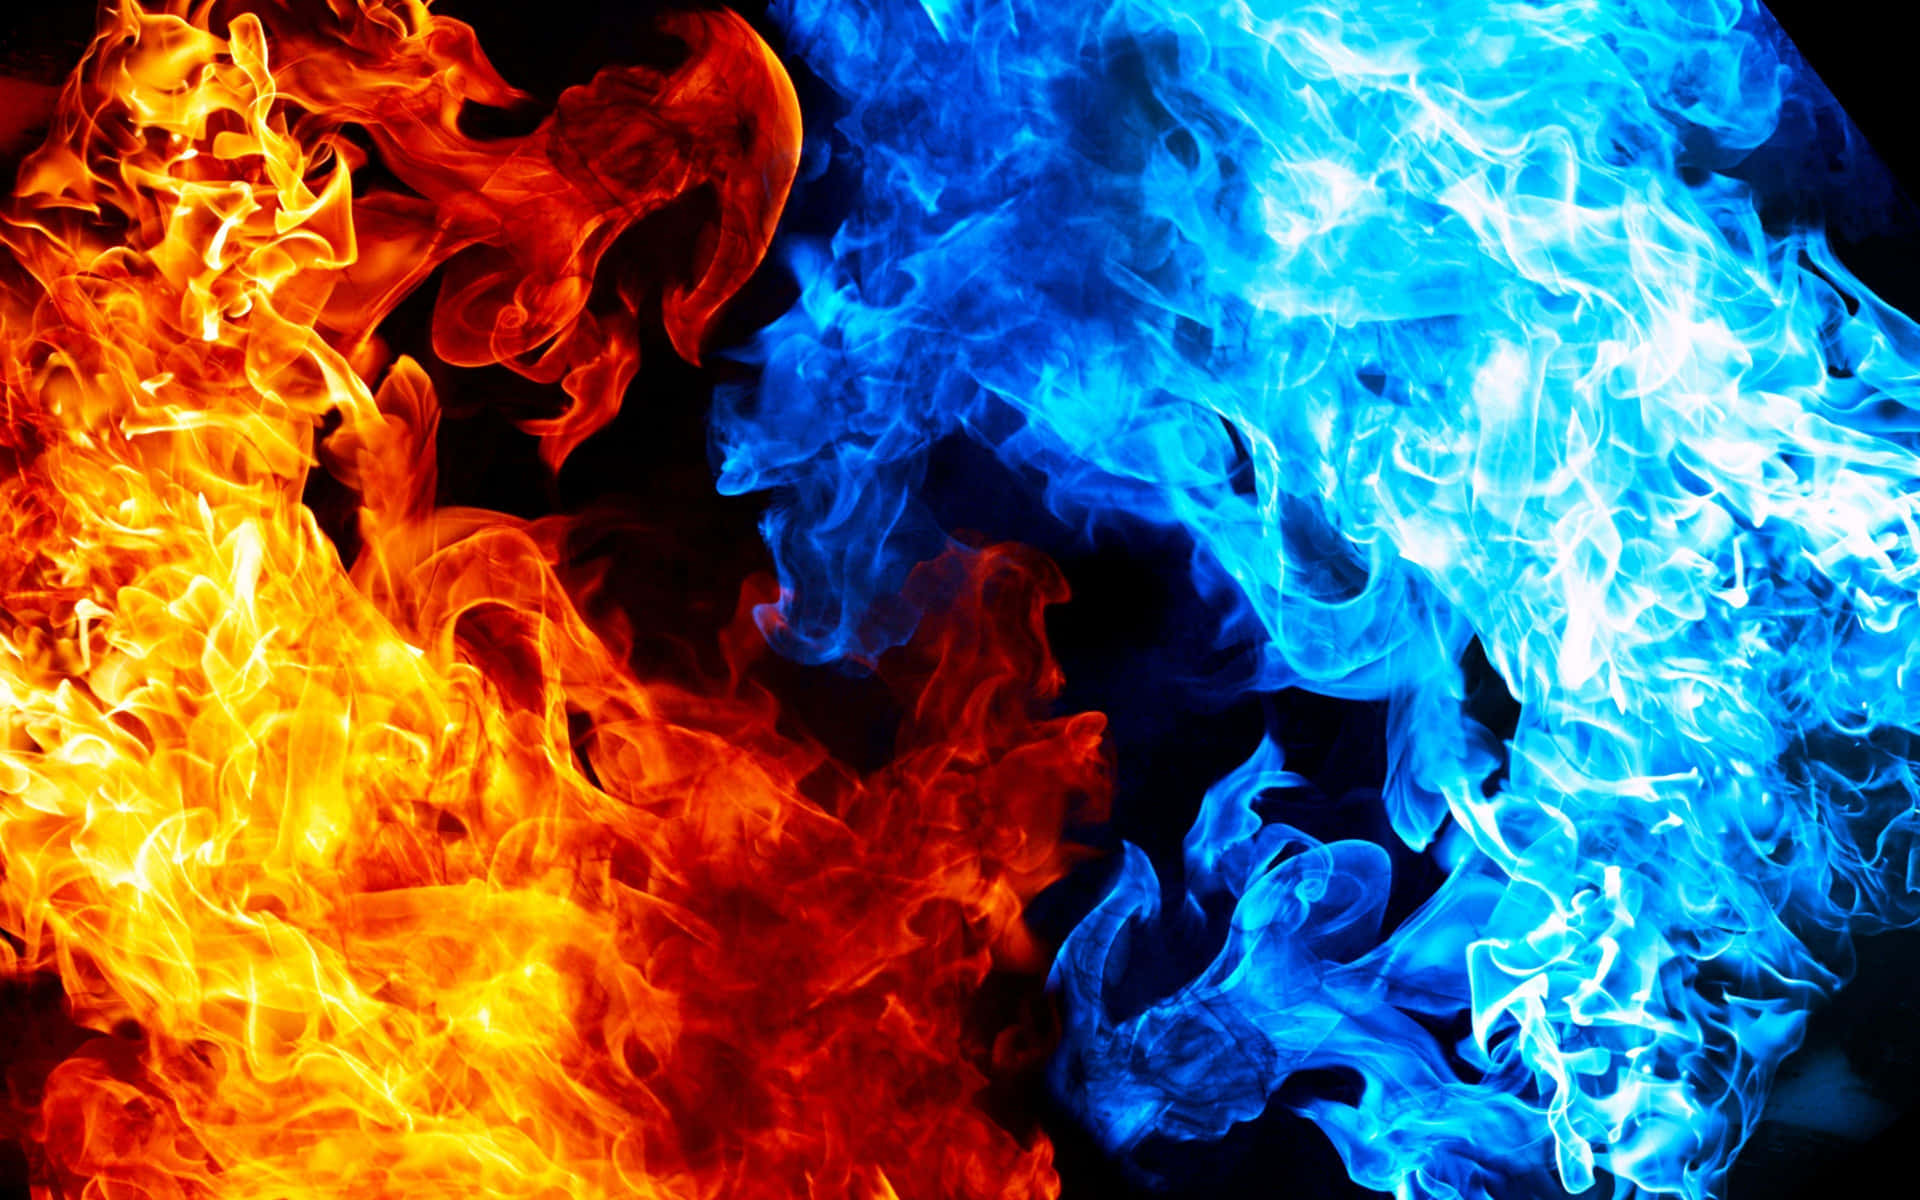 Blue Fire Background